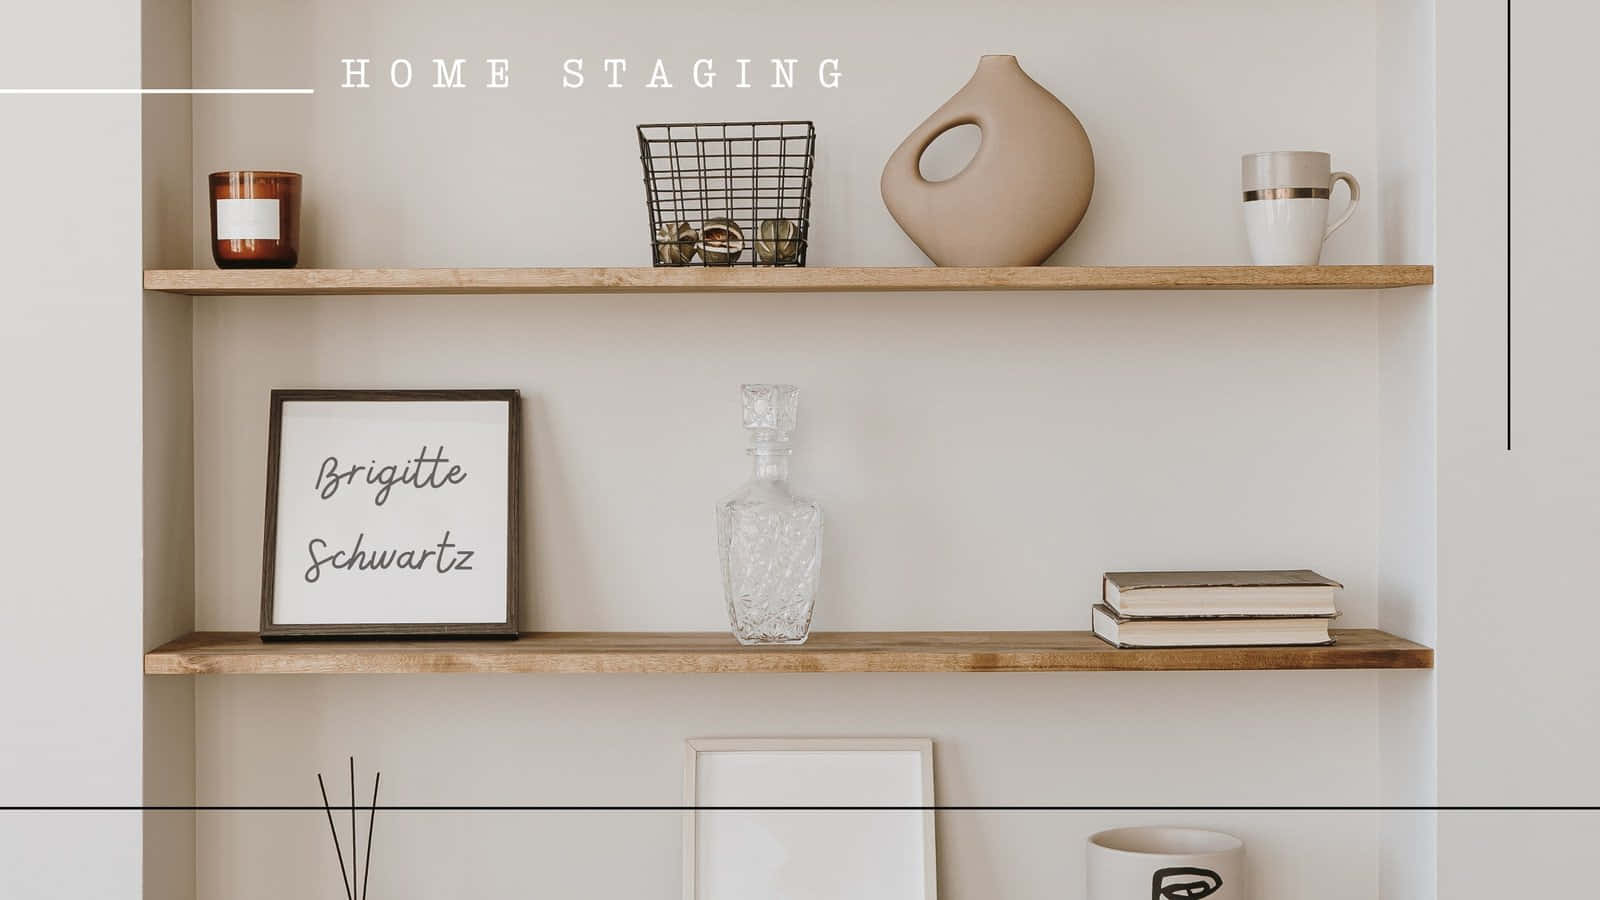 Stay organized and stylish with these fashionable shelves